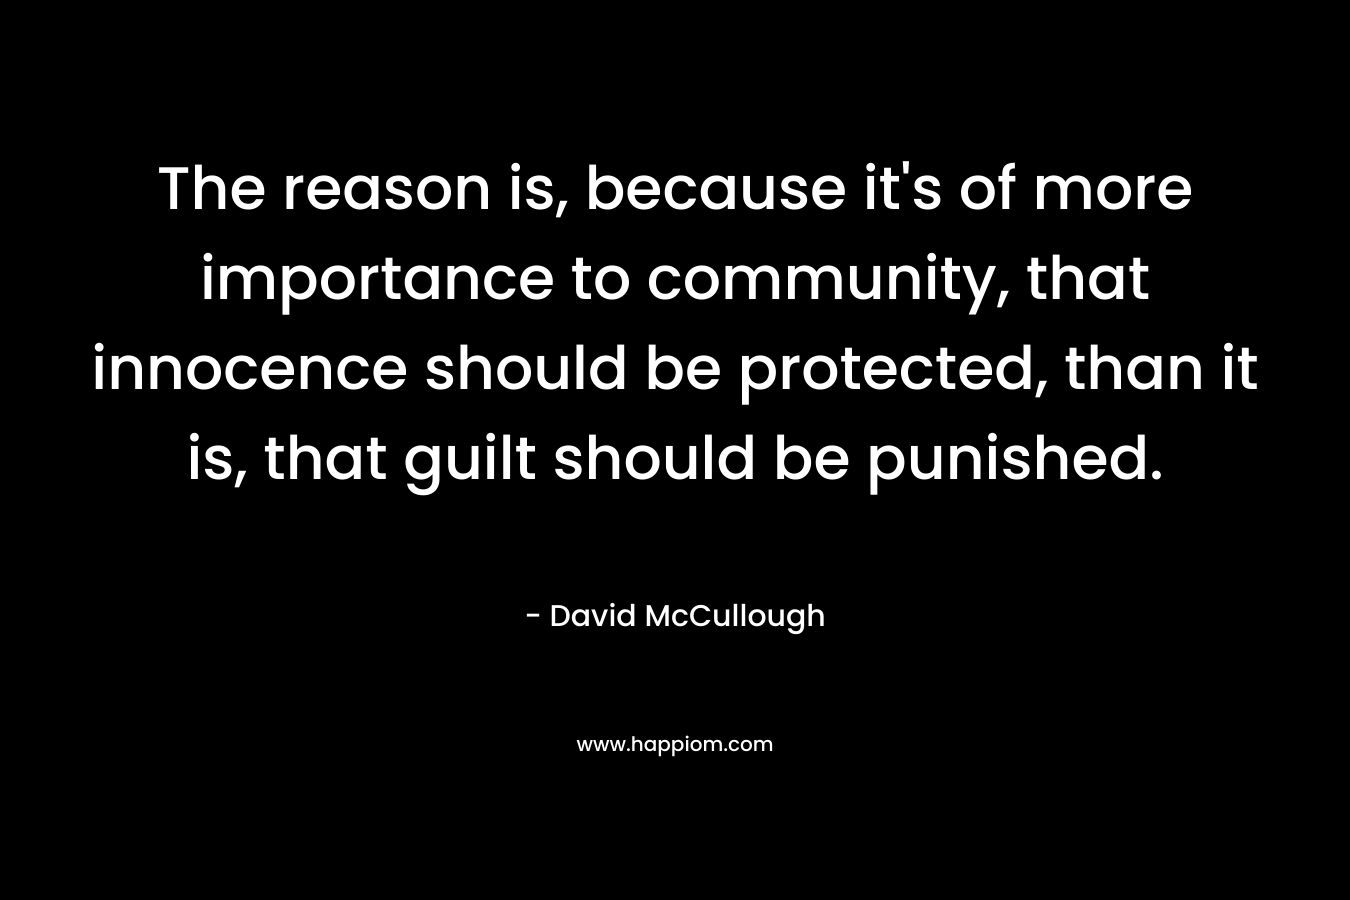 The reason is, because it’s of more importance to community, that innocence should be protected, than it is, that guilt should be punished. – David McCullough